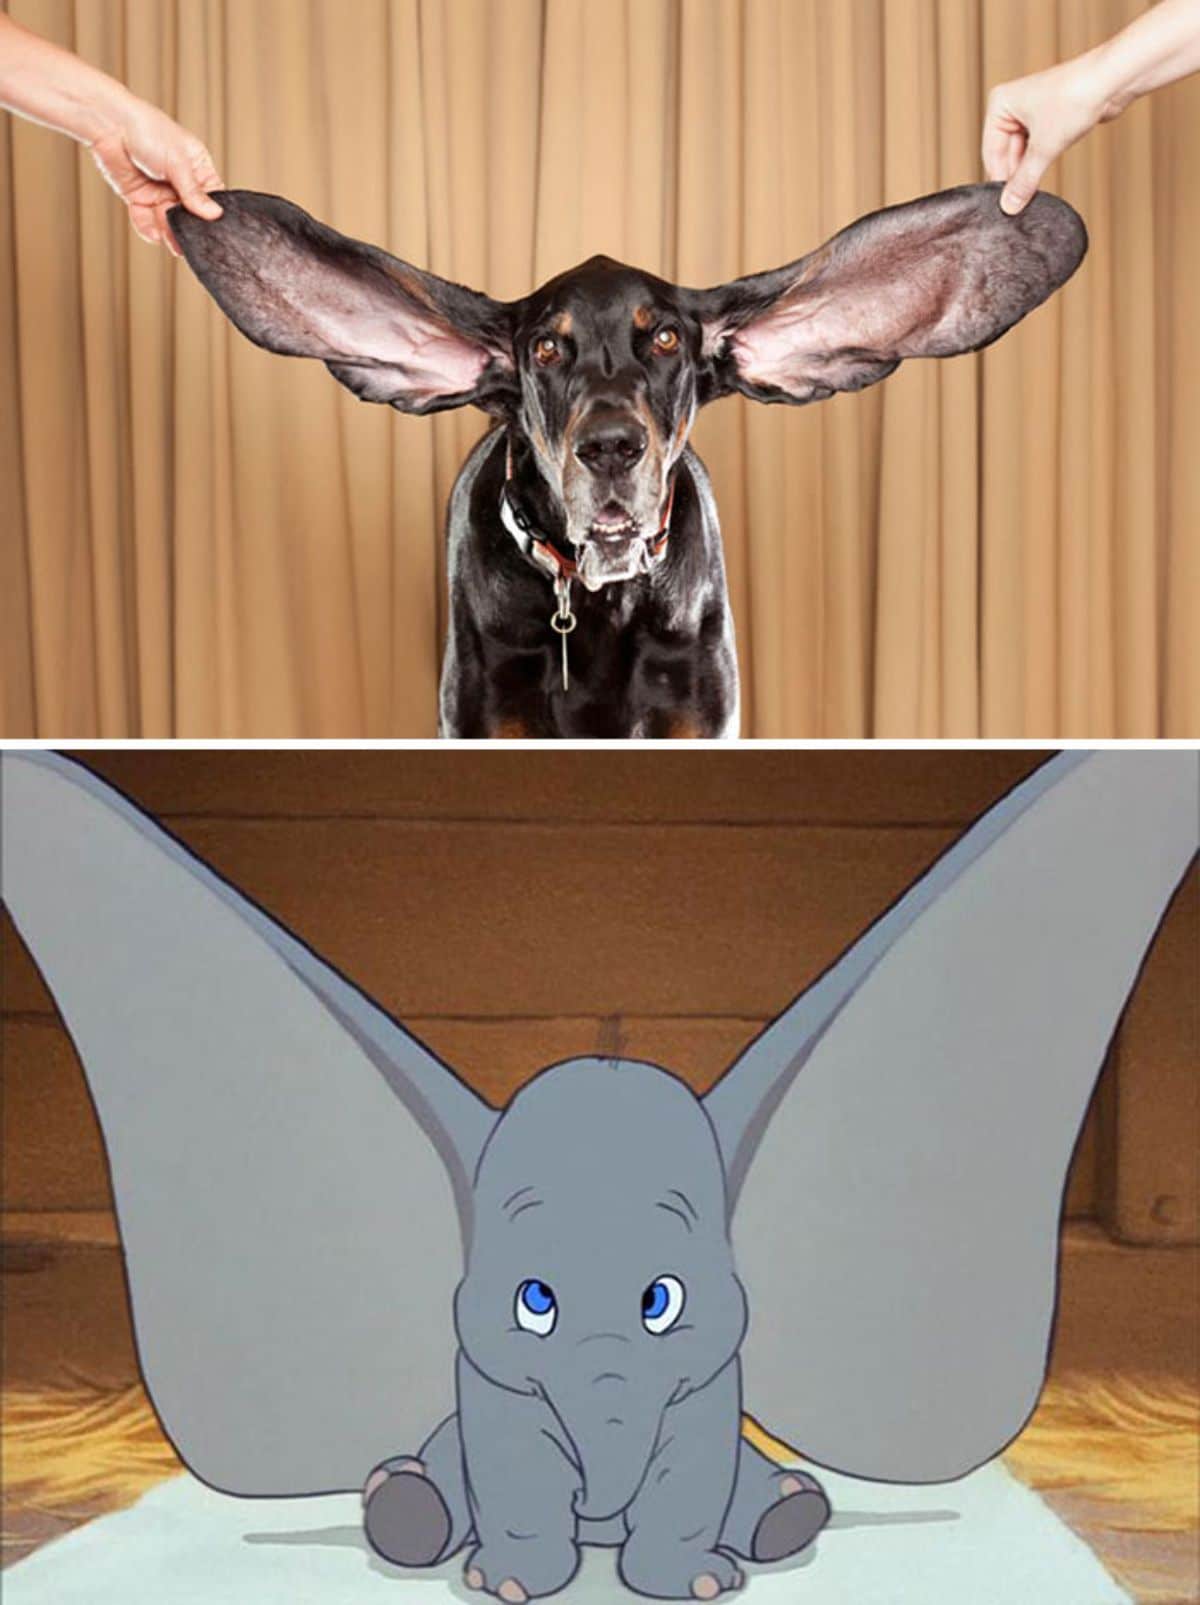 1 photo of black hound dog with people holding out the large ears and 1 photo of dumbo from the cartoon